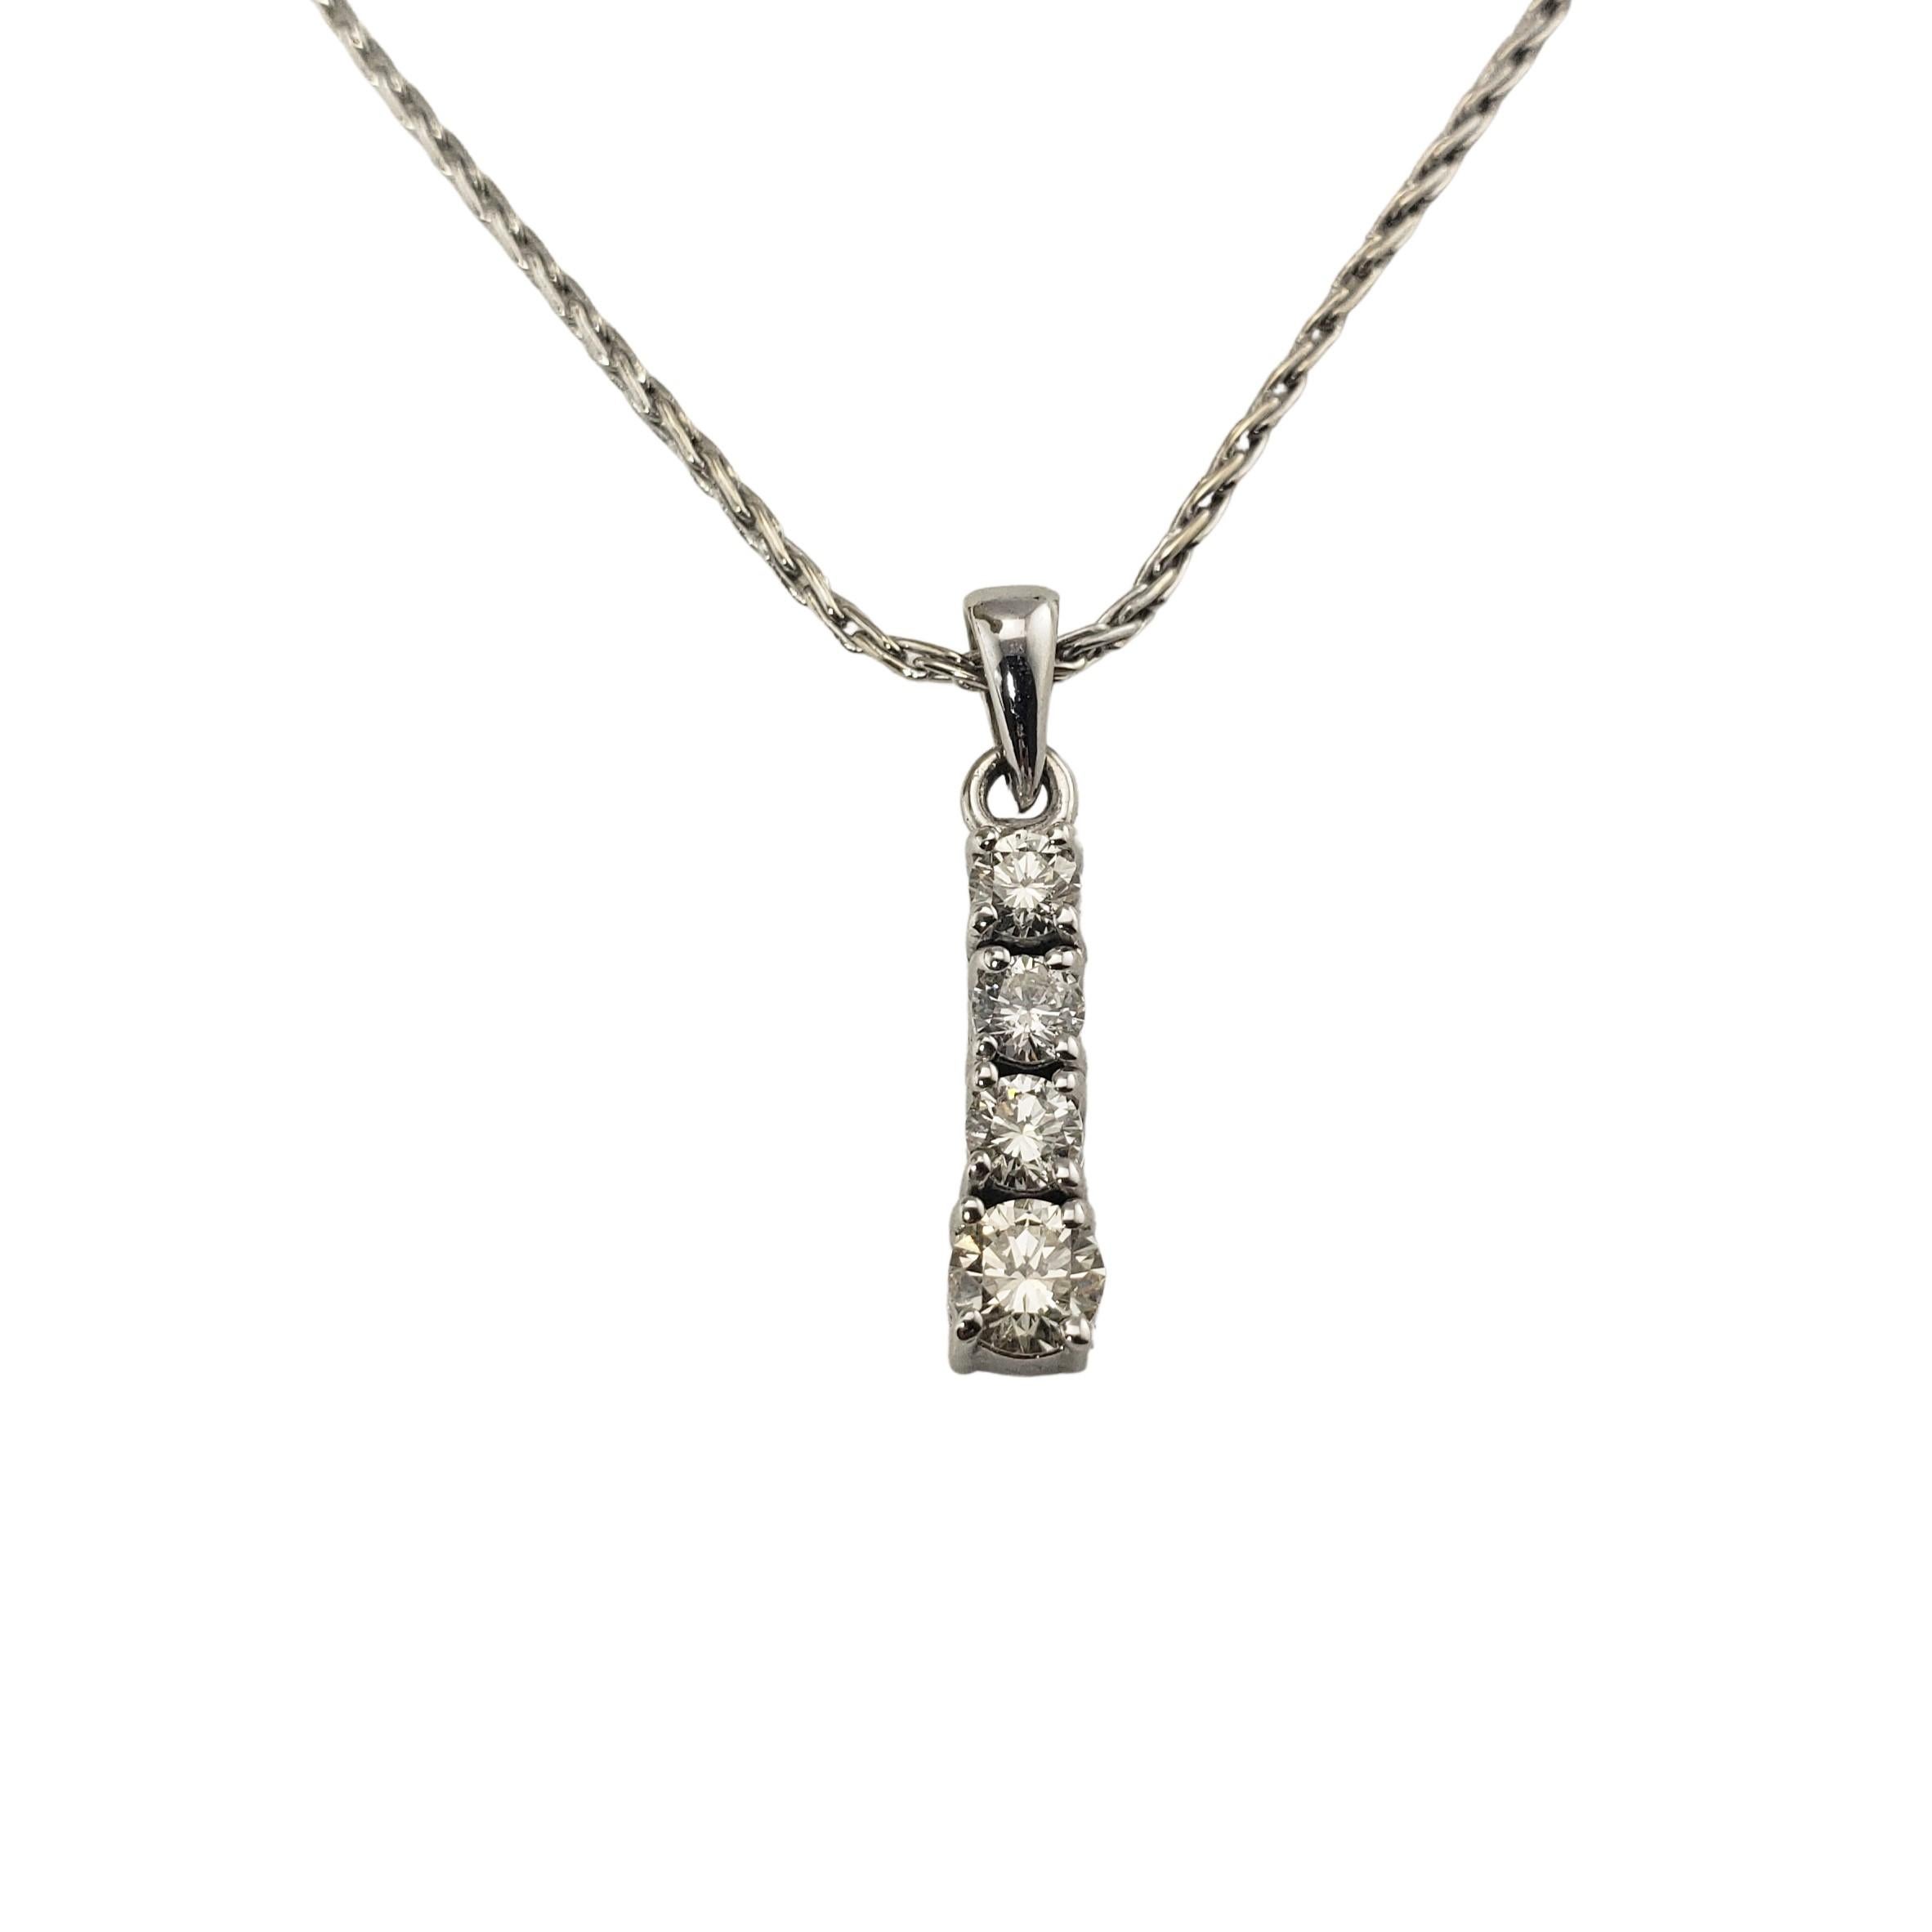 Vintage 18 Karat White Gold and Diamond Pendant Necklace-

This sparkling pendant features four round brilliant cut diamonds set in elegant 18K white gold. Suspends from a classic wheat necklace.

Approximate total diamond weight: .69 ct.

Diamond